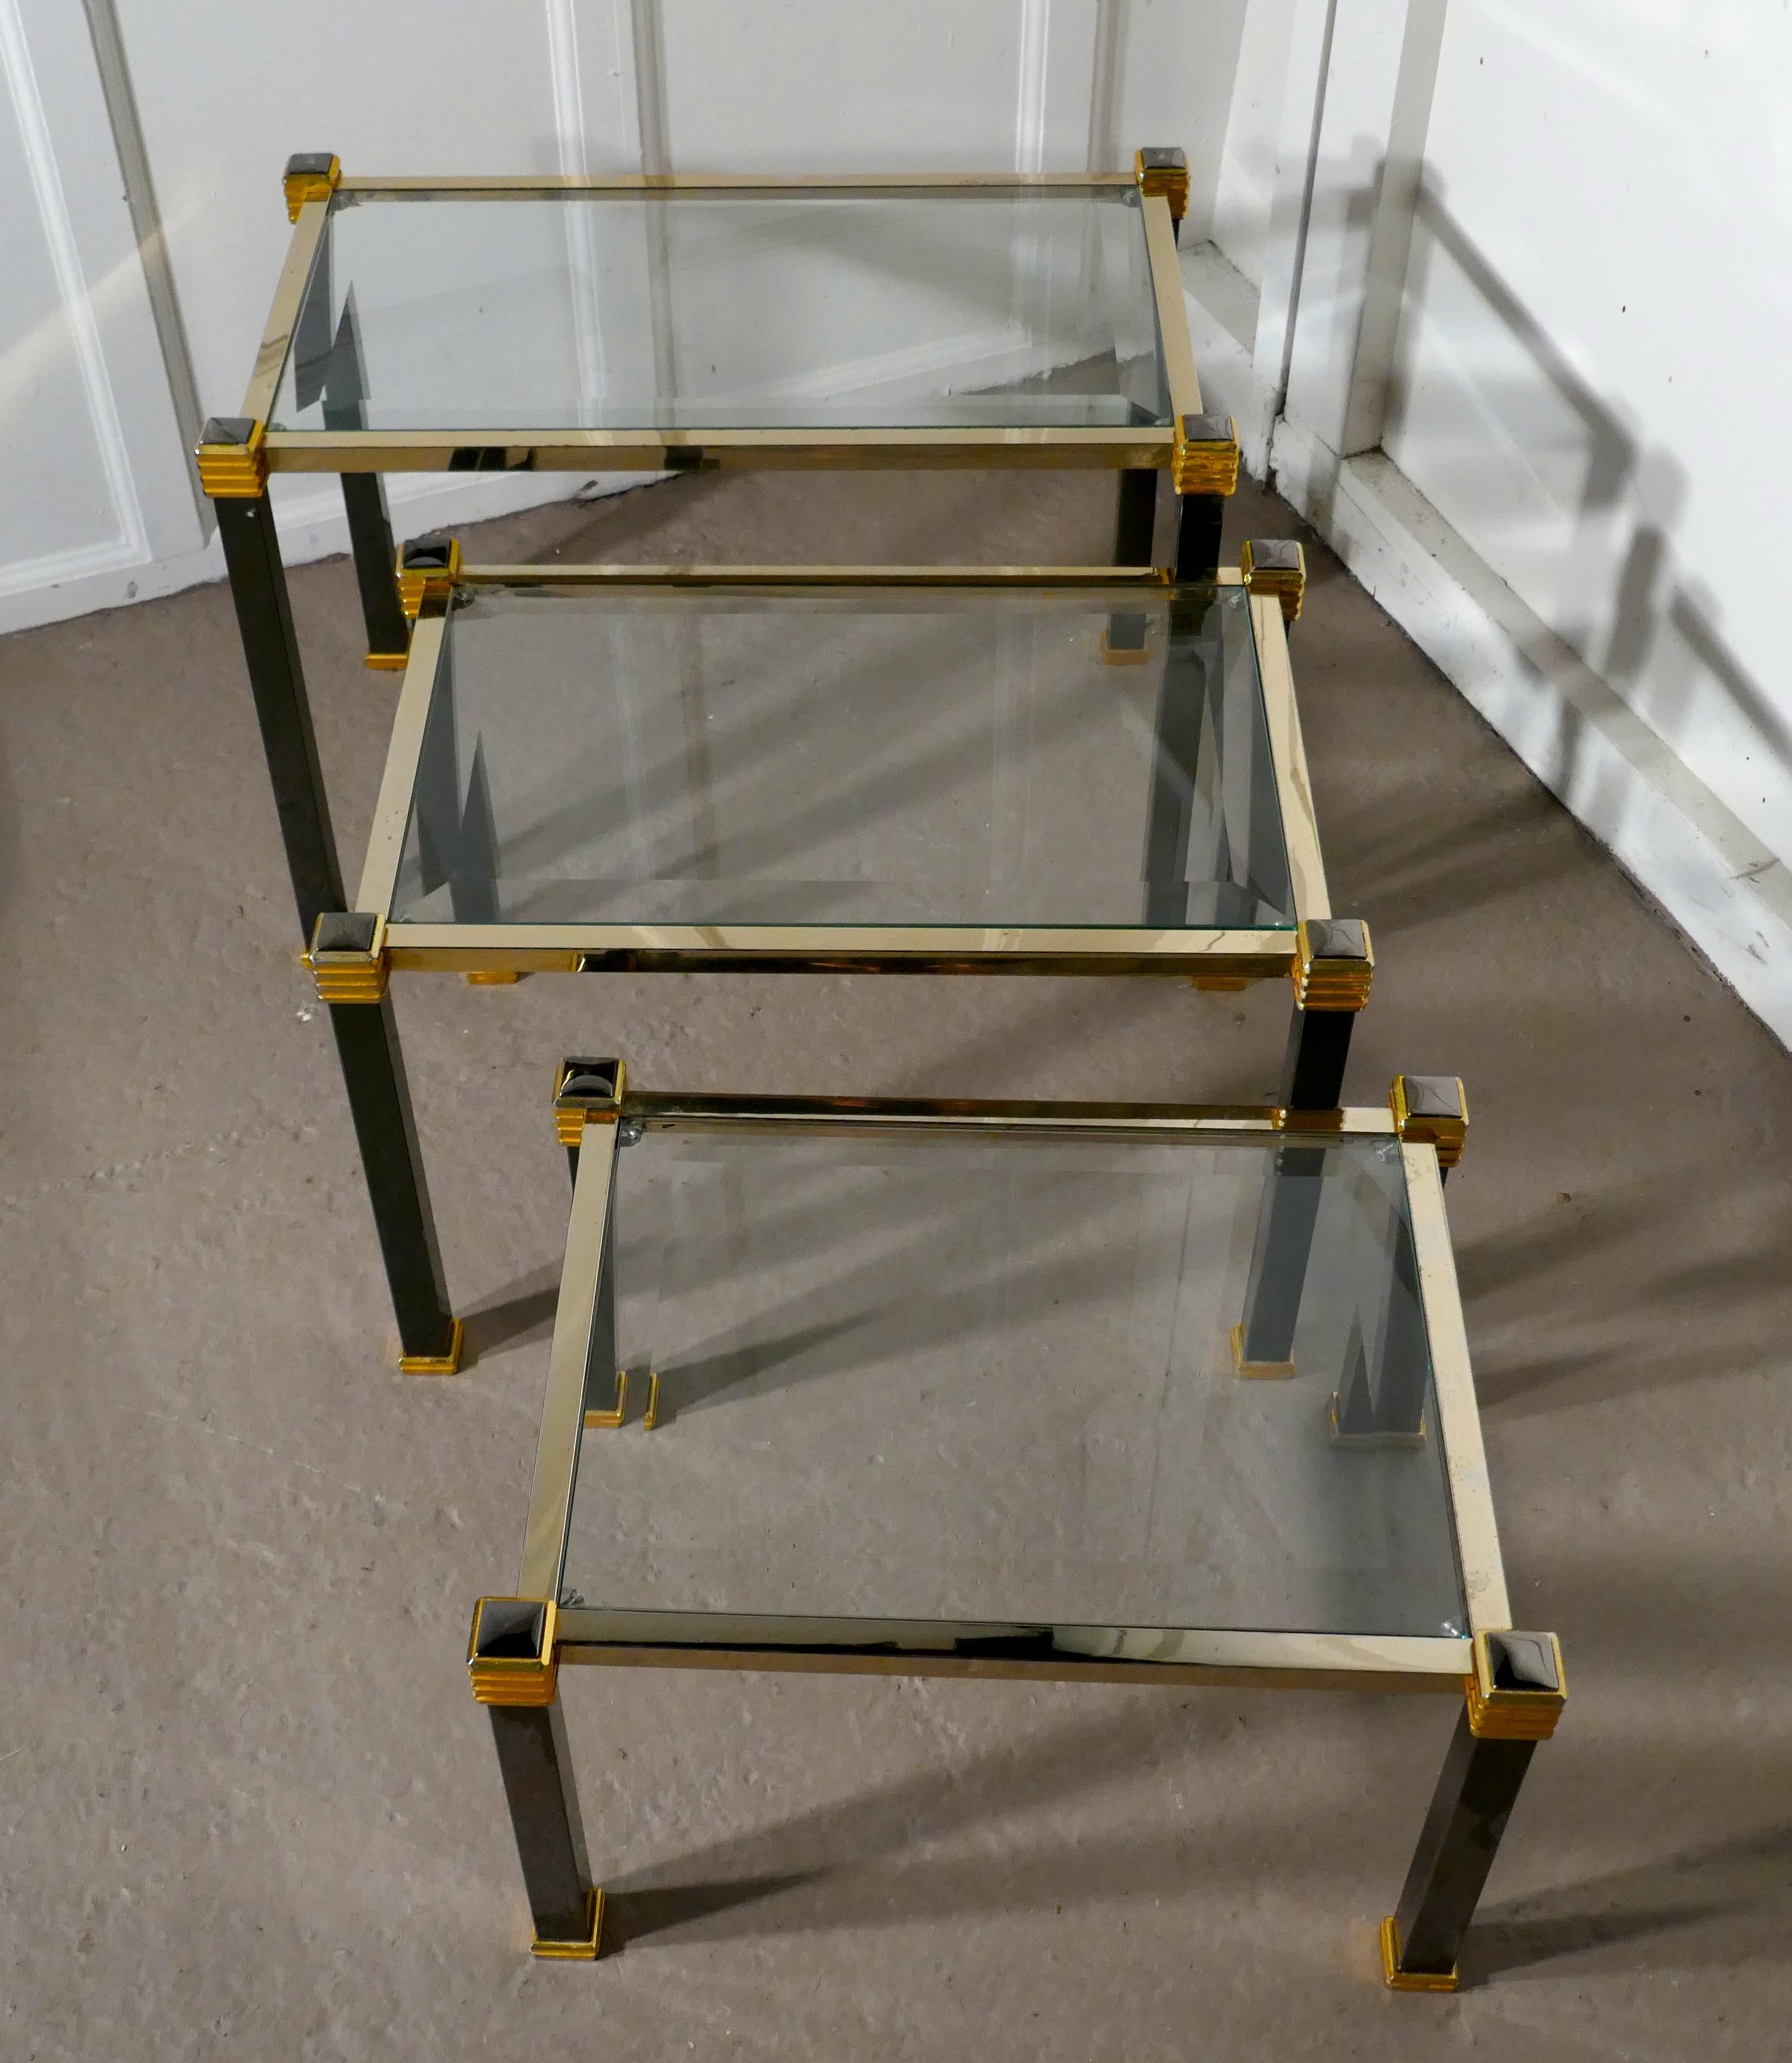 French Art Deco Glass and Brass Nest of Tables

This is a very stylish good-looking set of tables, they have bevelled glass table tops set on Black and Brass coloured metal frames
The tables are sound and in good condition, as with all Nests of